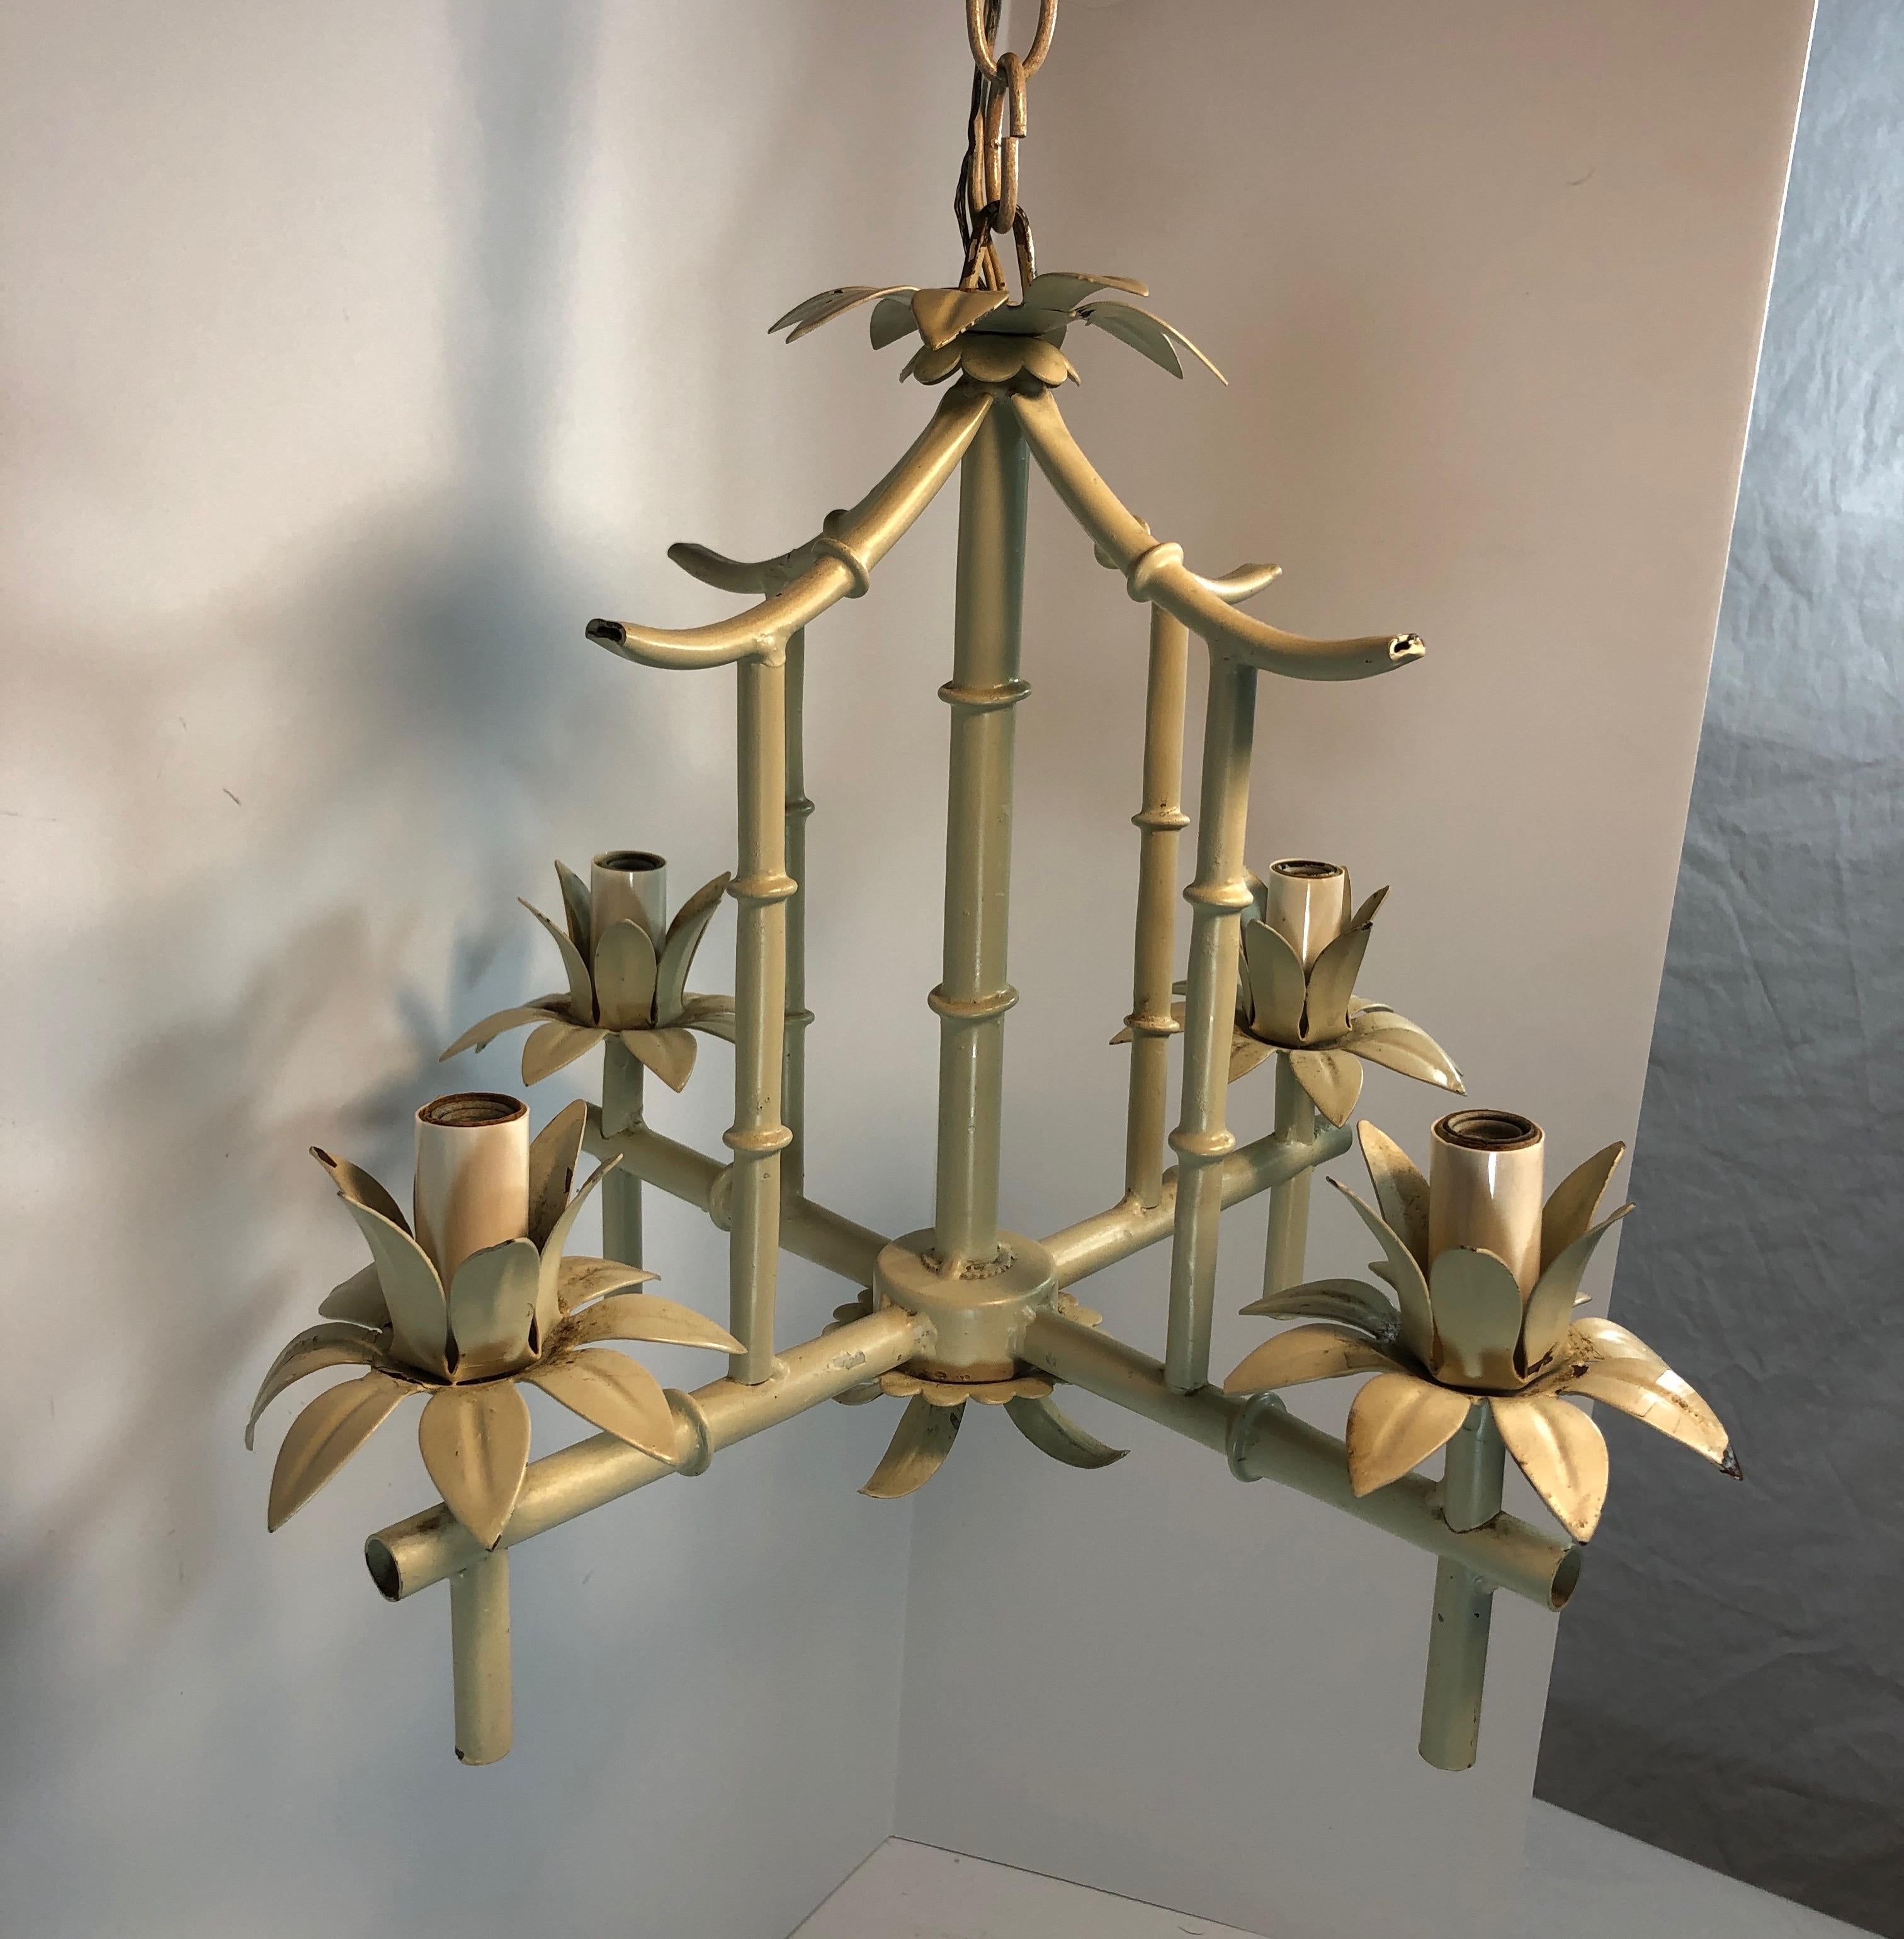 Petite faux bamboo chandelier with four arms in chippy beige paint. Italy tag. Height with out chain is 12